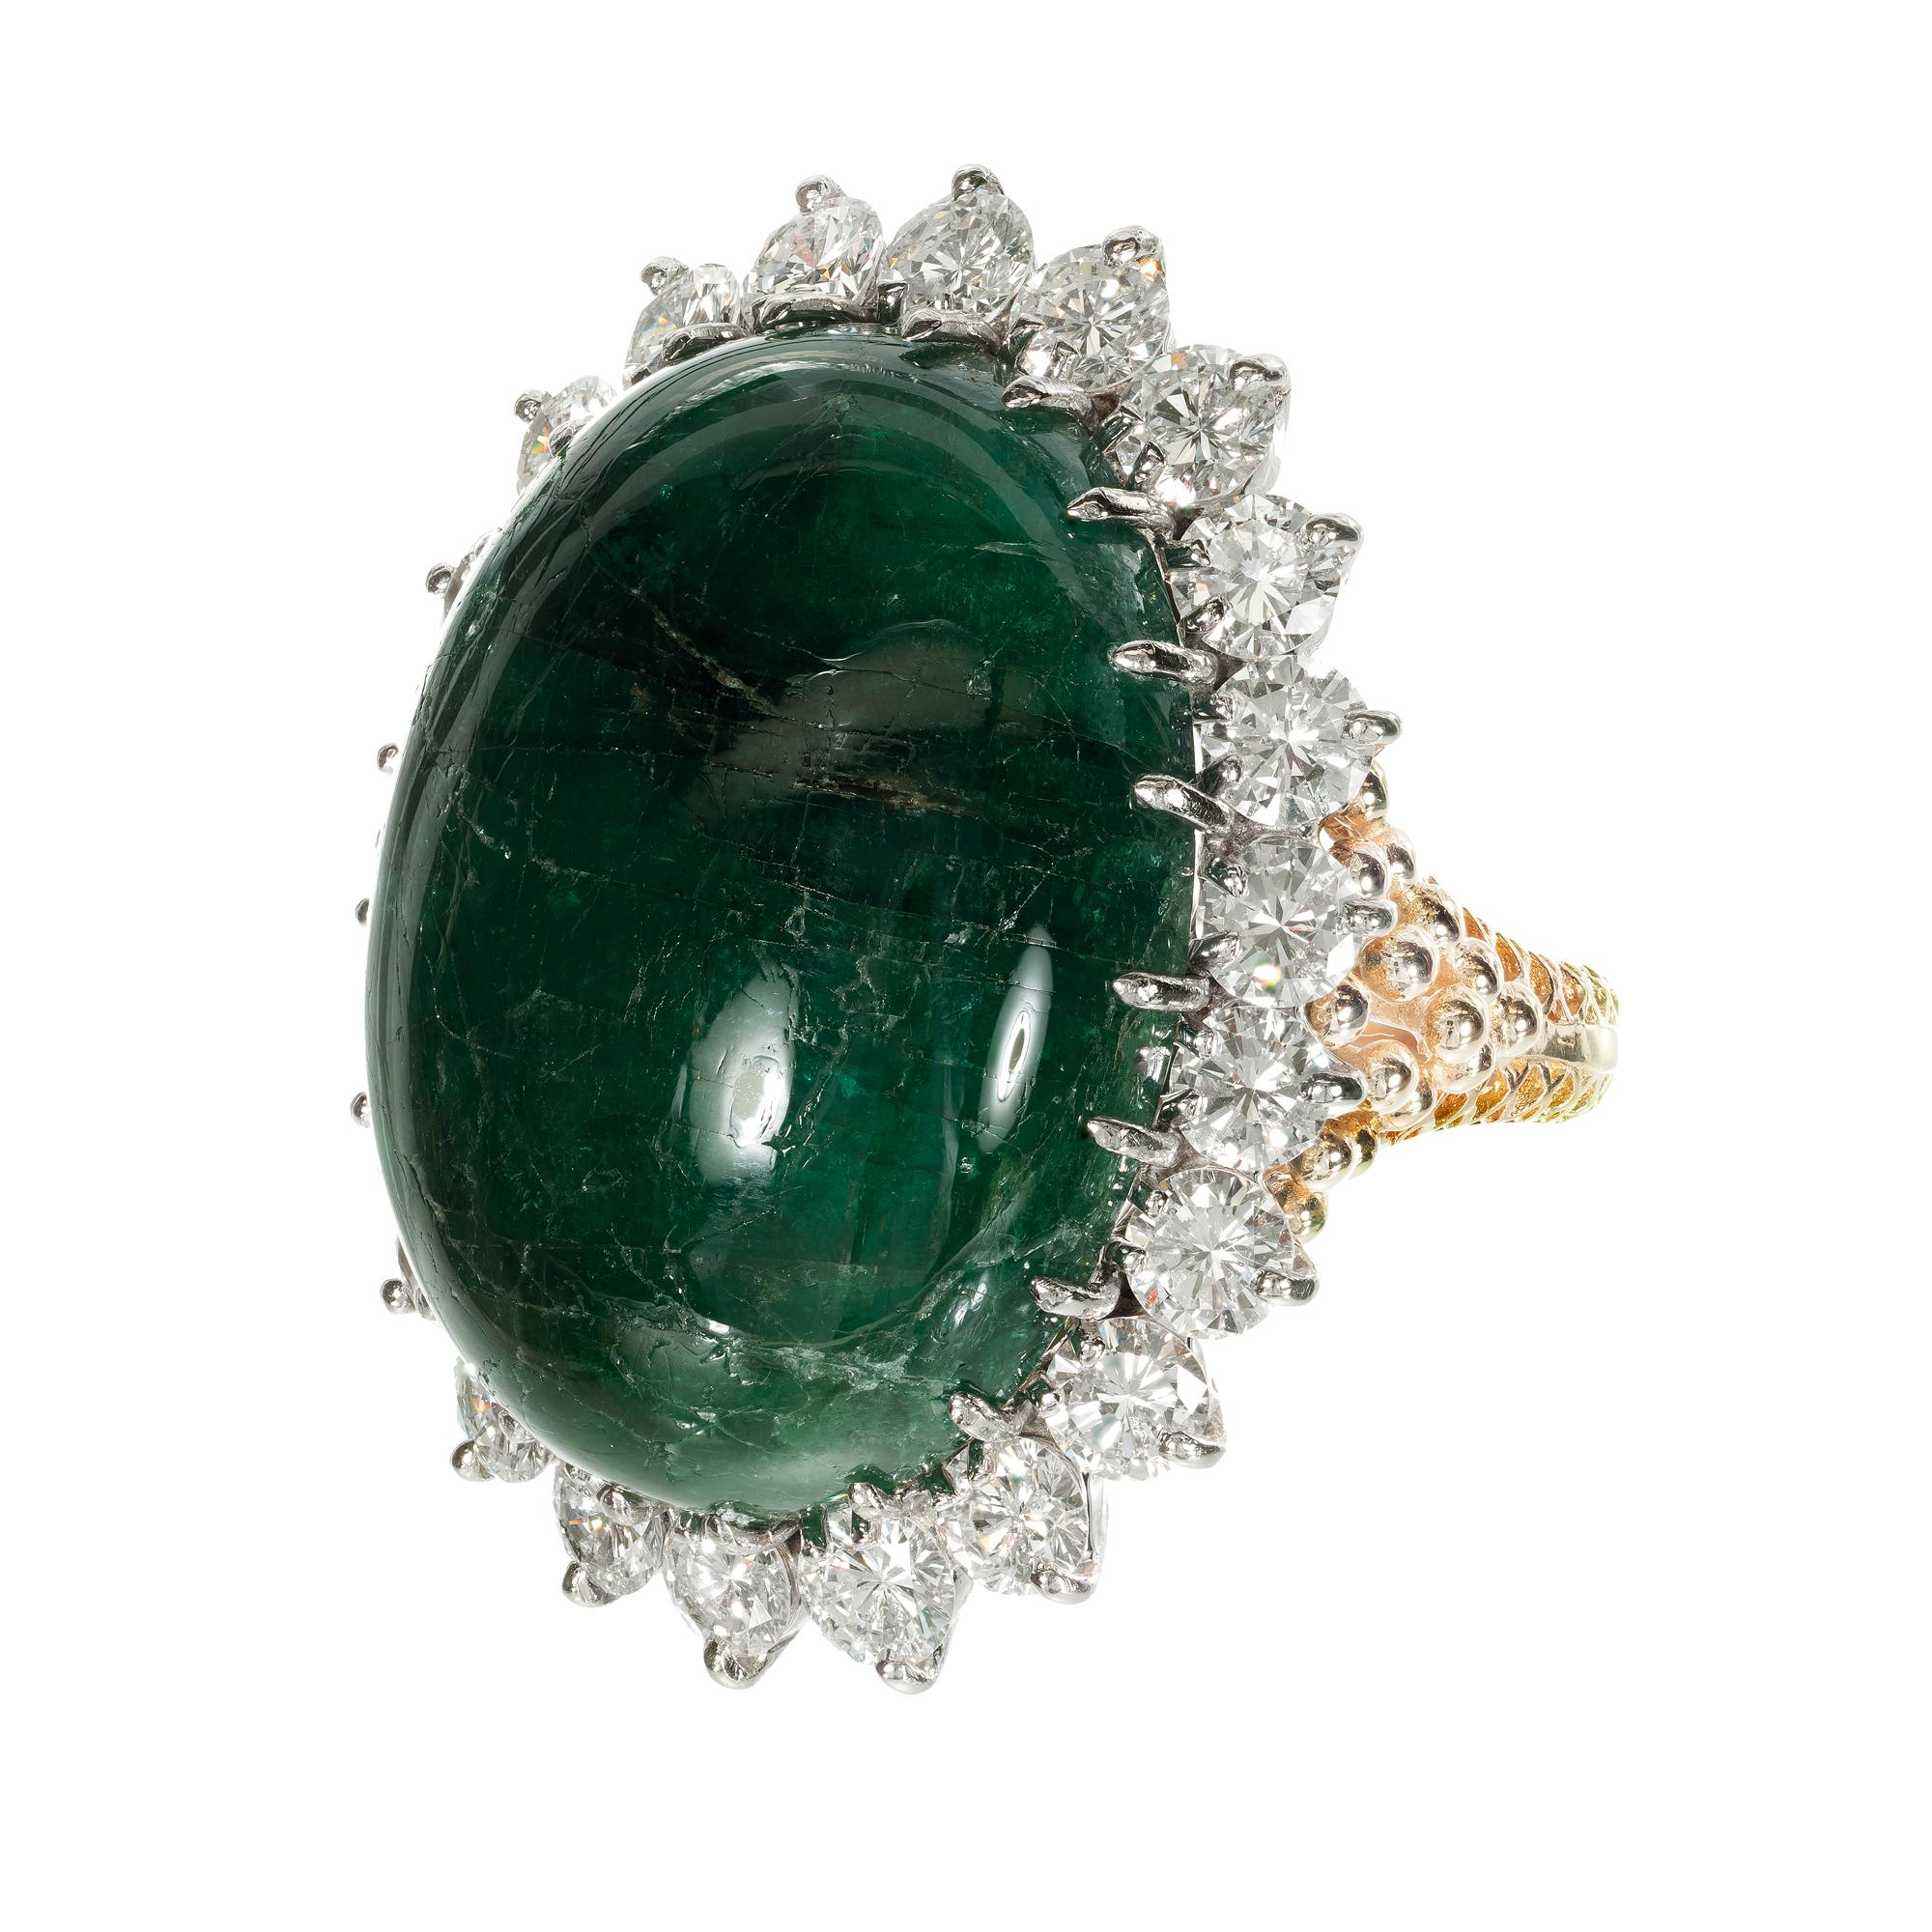 Large Oval natural cabochon emerald and diamond domed cocktail ring. 41.78 carat center oval emerald GIA certified. Set in 18k yellow gold with a halo of 5.50ct diamonds set in 18k white gold crown. GIA certified.  

1 oval green cabochon I emerald,